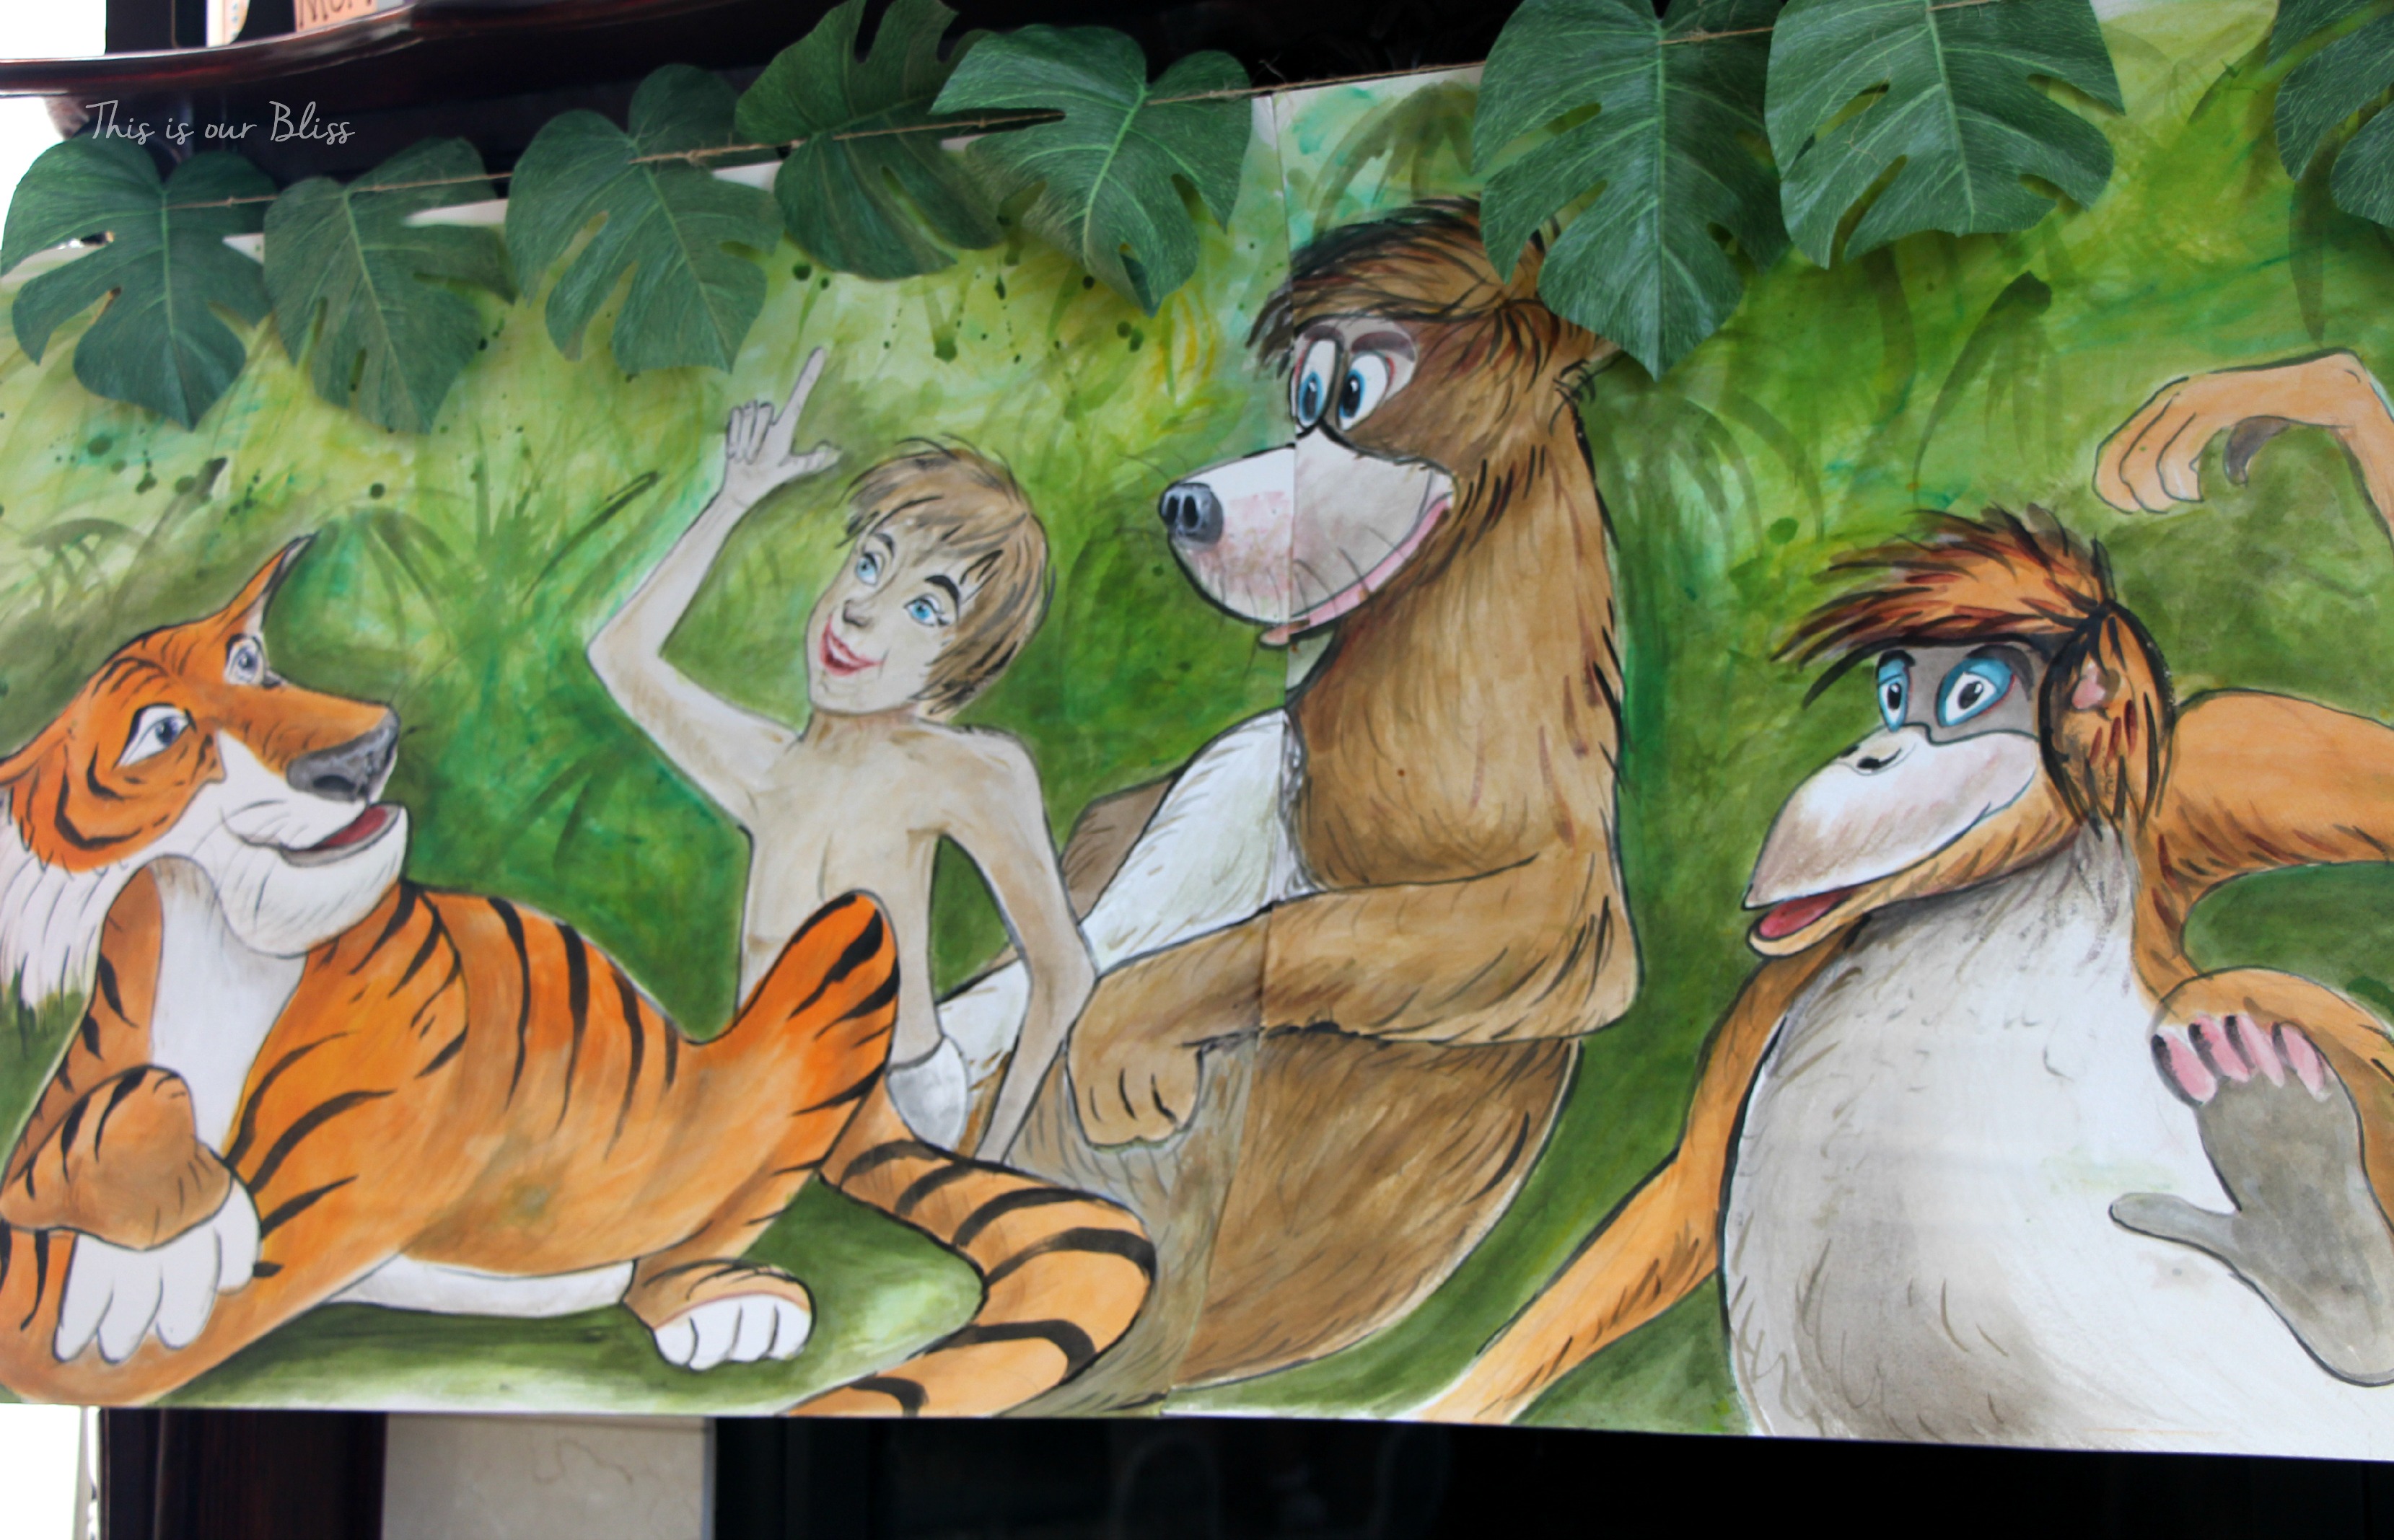 hand-painted Jungle book themed canvas banner - This is our Bliss